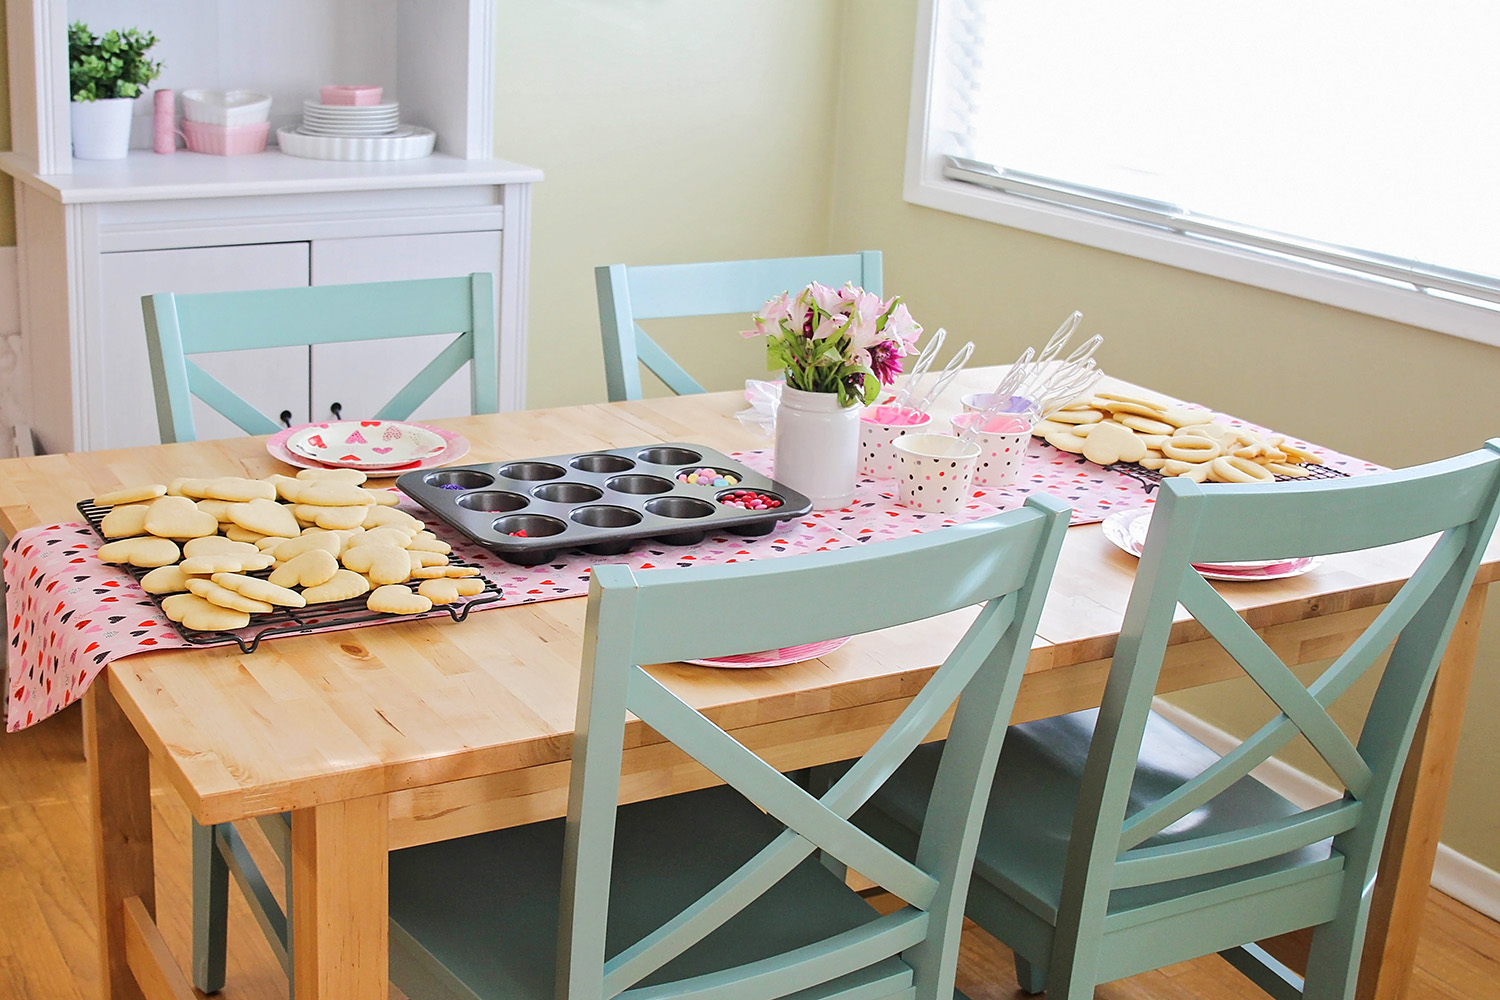 This simple and fun Valentine's Day cookie party is the perfect way to make some sweet memories with your little ones! 